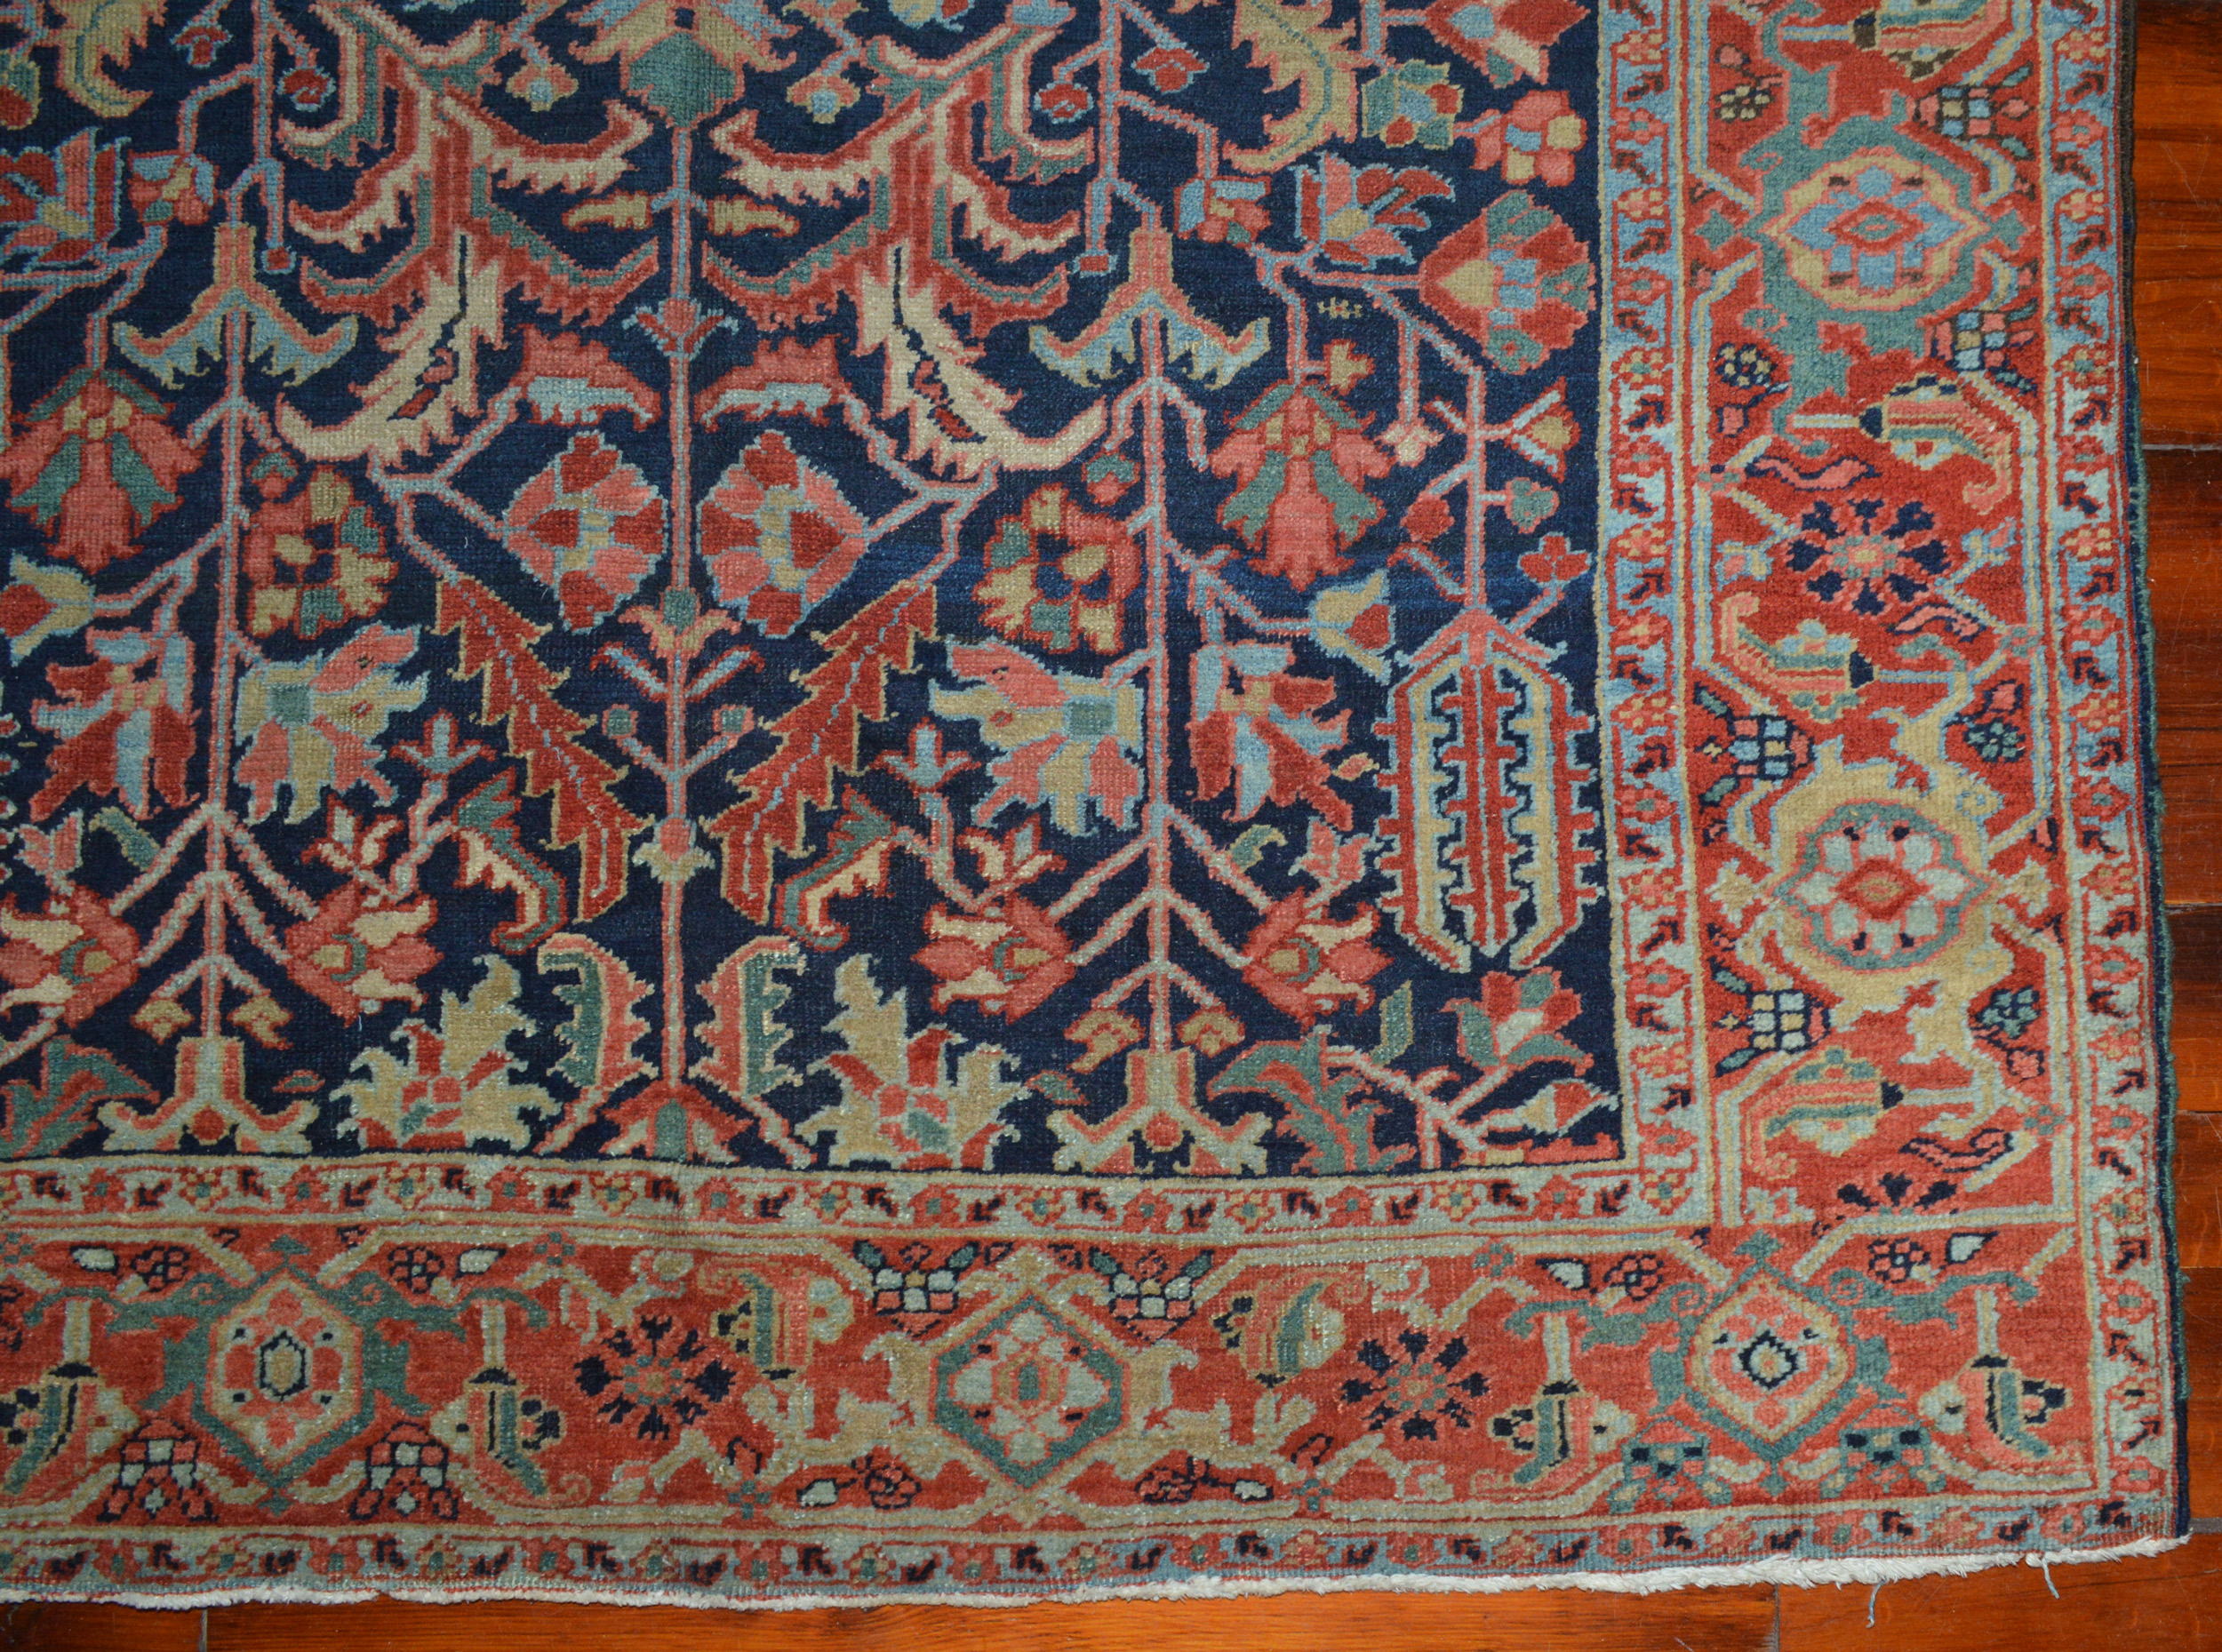 Detail photo of the field and border of an antique Persian Heriz carpet featuring a navy blue field with stylized leaves and flowers. A red border with the Turtle design frames the field. Douglas Stock Gallery, antique Persian carpets and Oriental rugs Boston,MA area